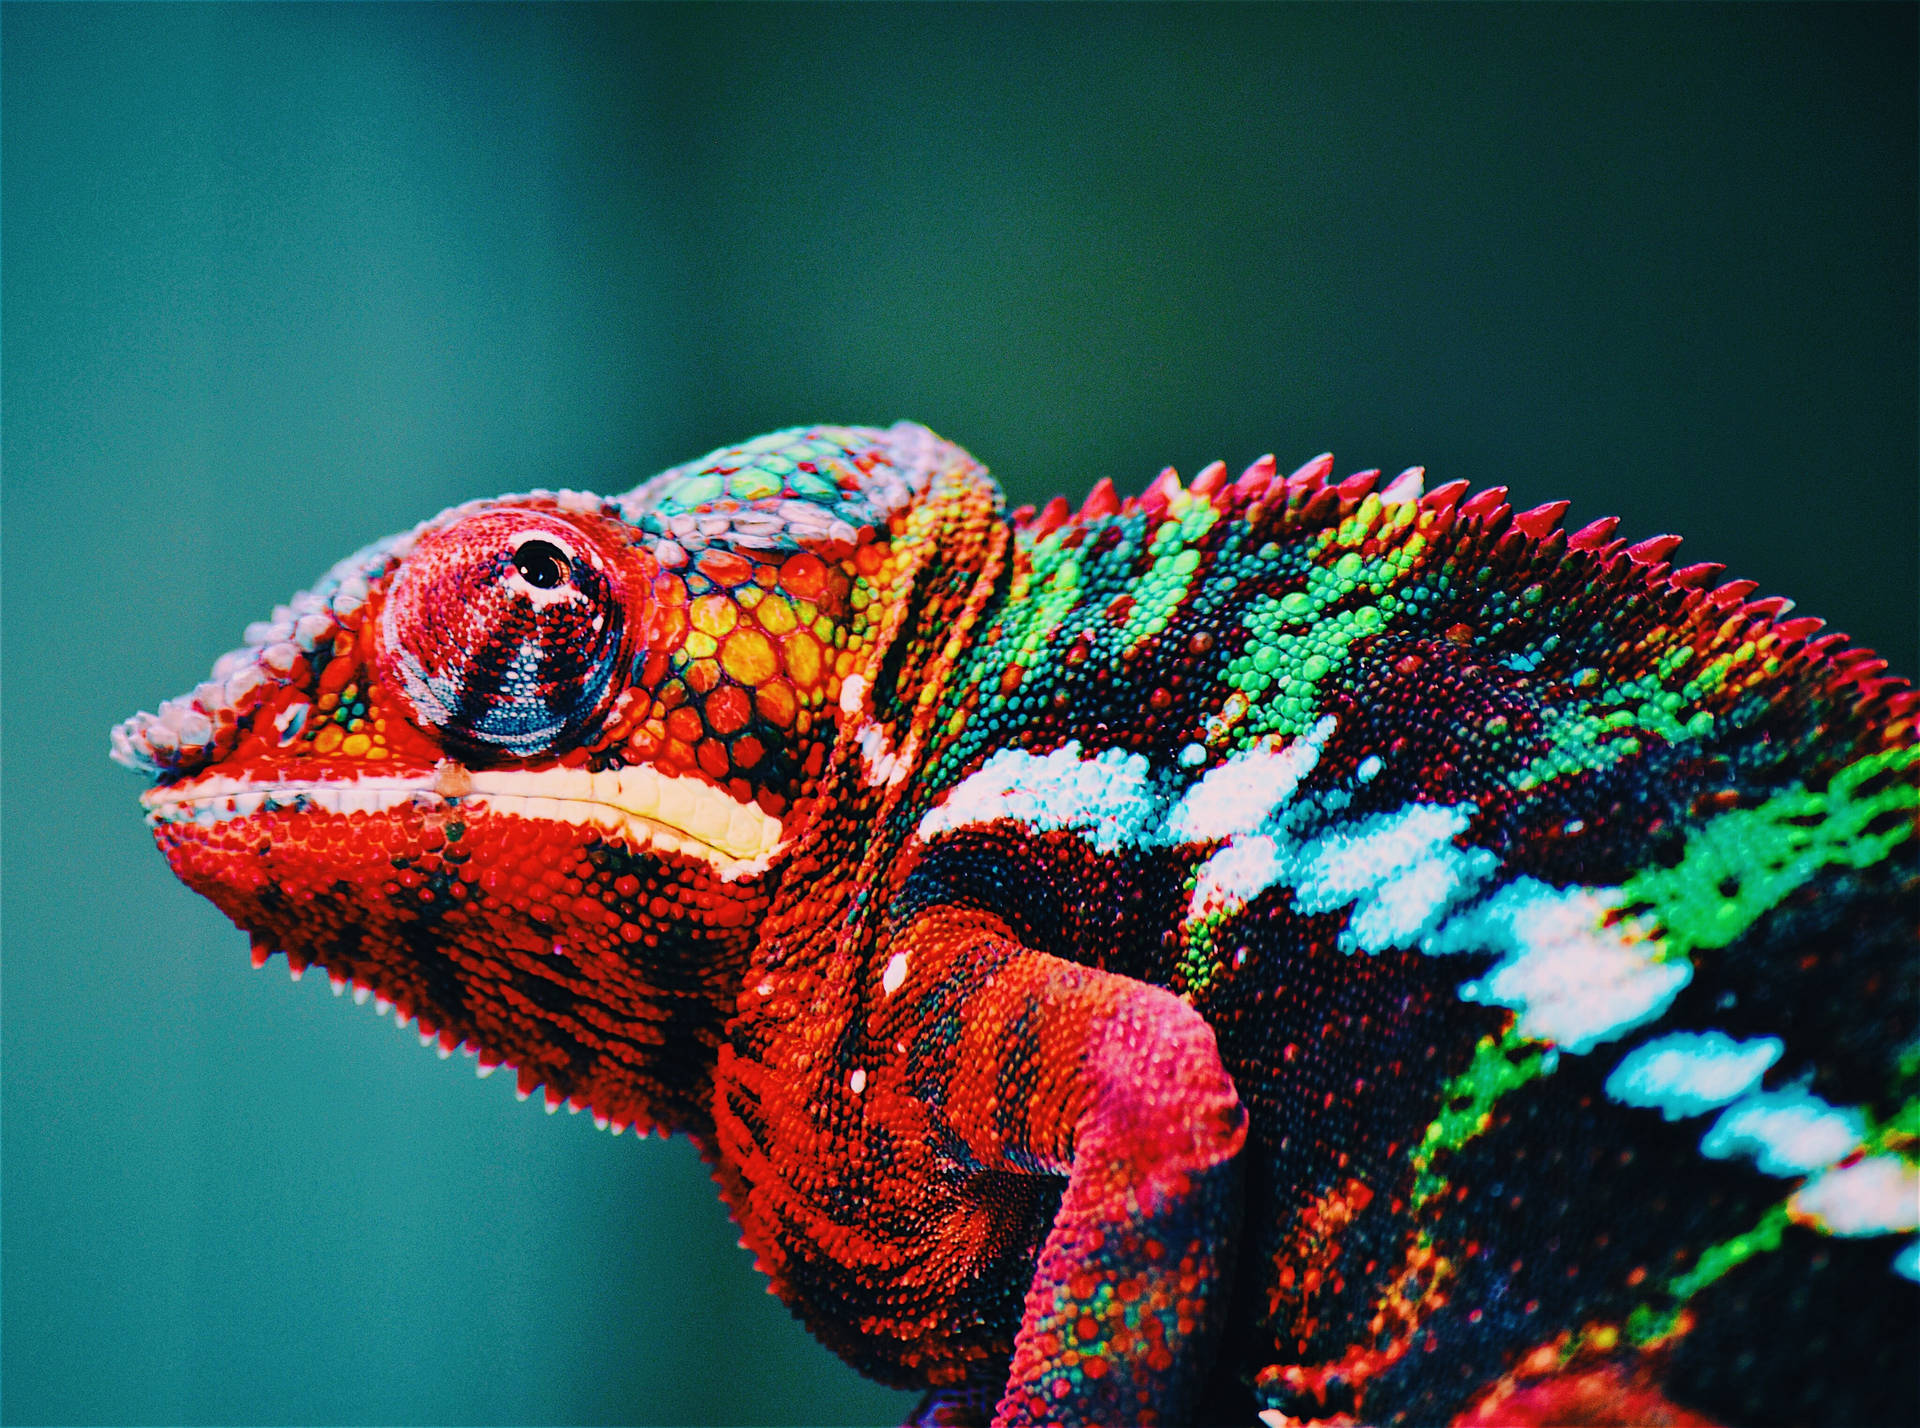 A Vibrant Display - Wild Chameleon In Nature Background